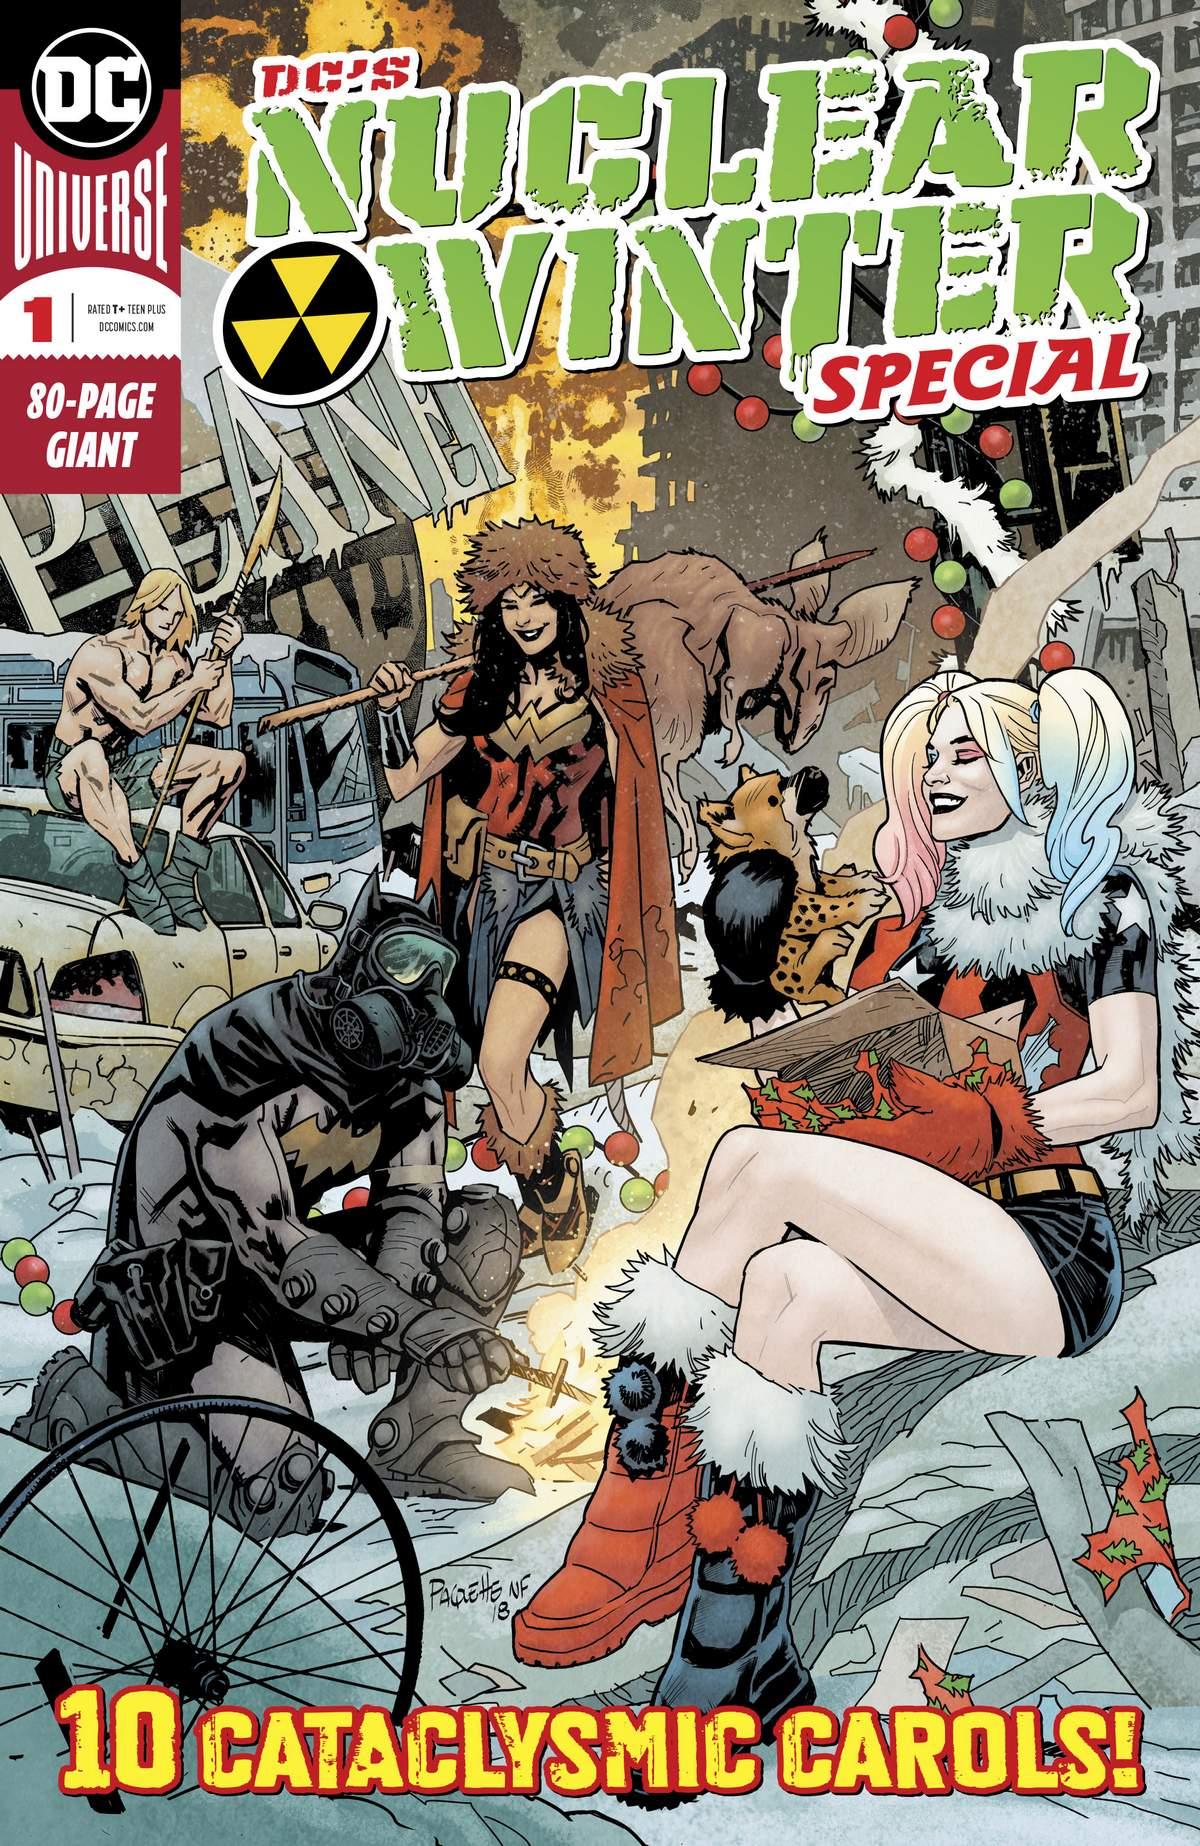 DC Nuclear Winter Special Vol. 1 #1